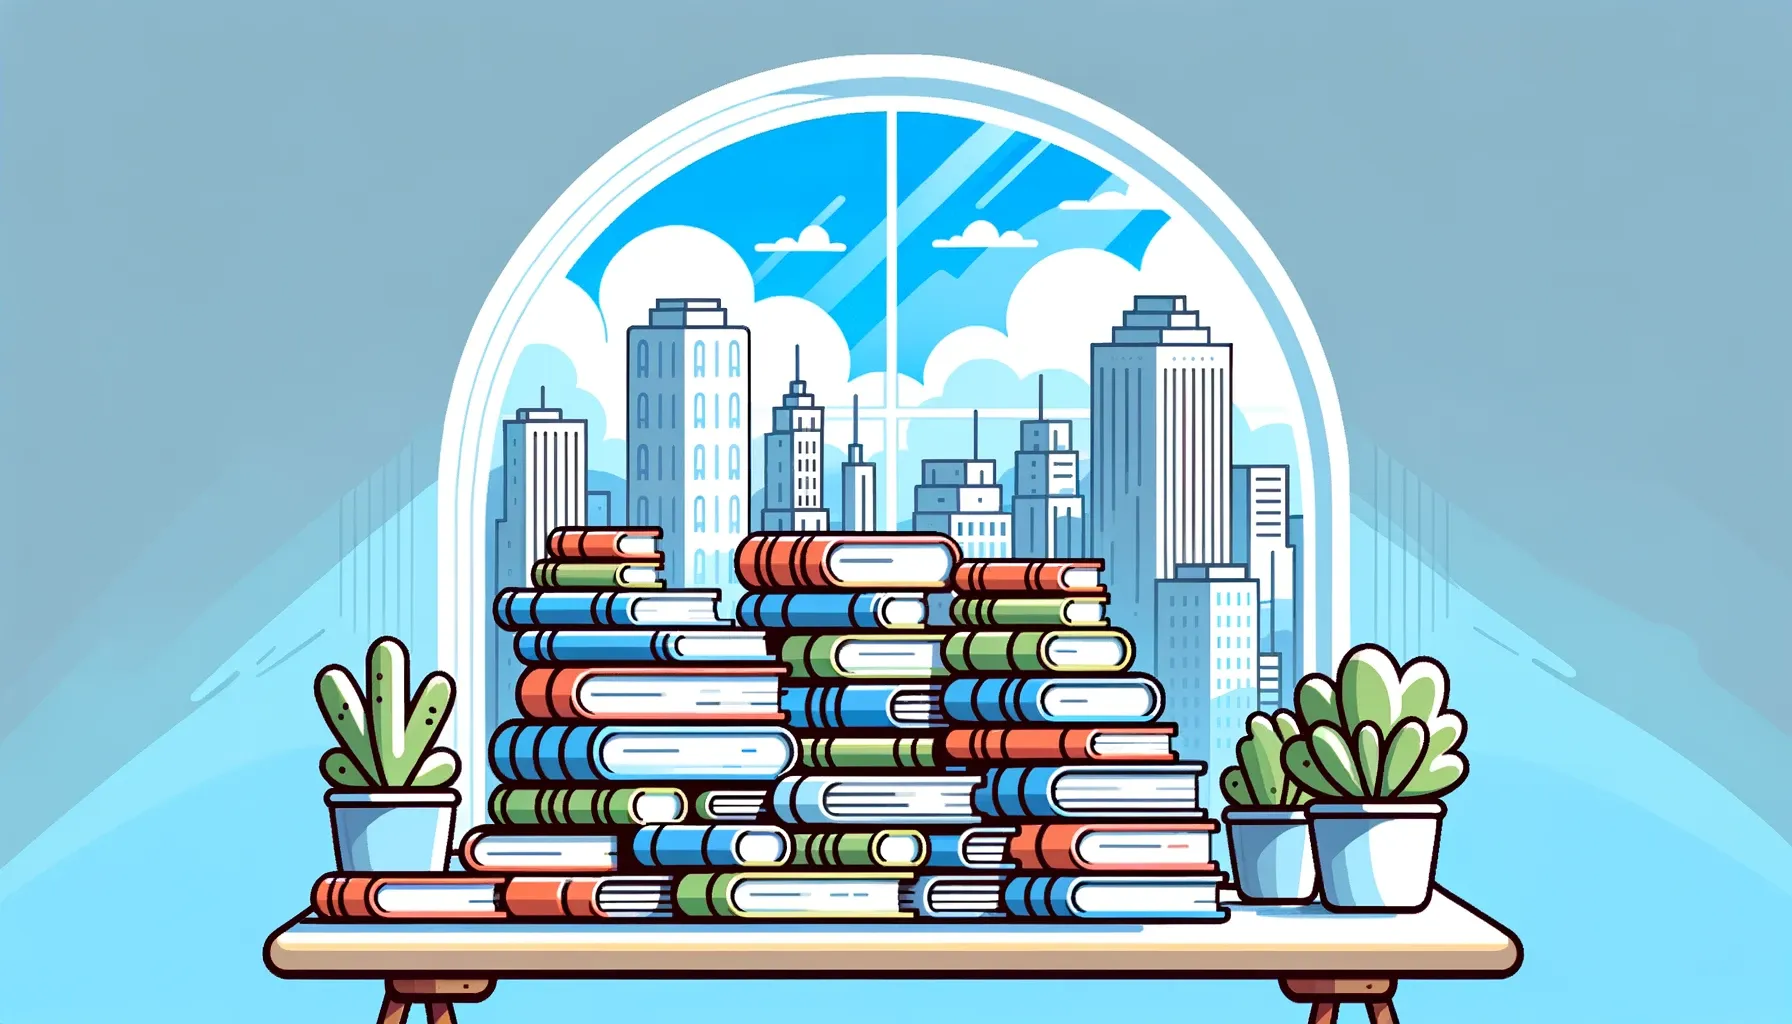 Books stacked on a table, in front of a skyline